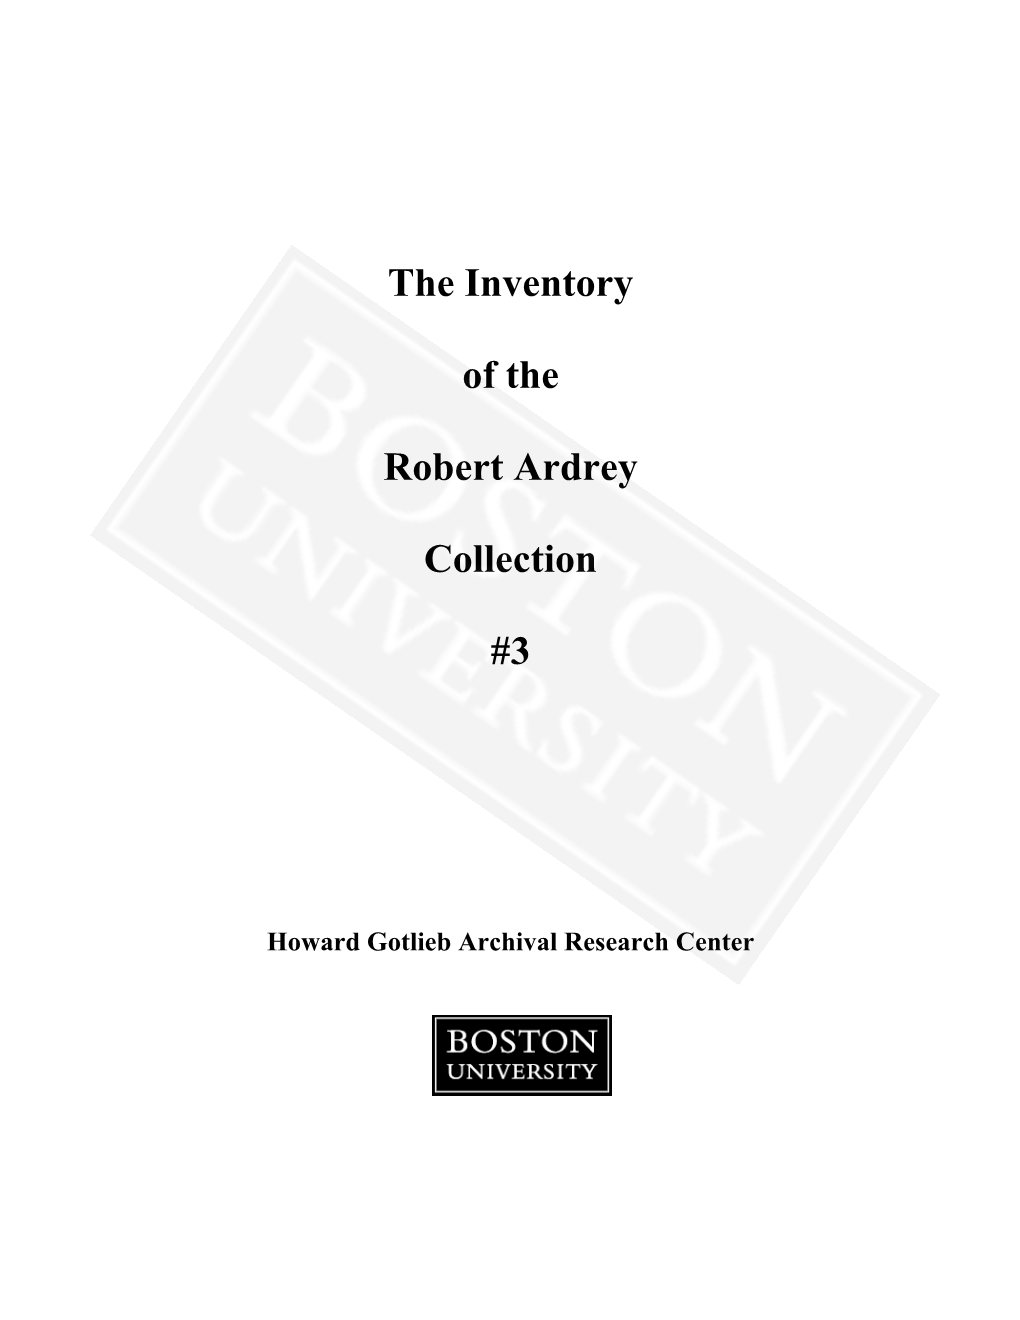 The Inventory of the Robert Ardrey Collection #3